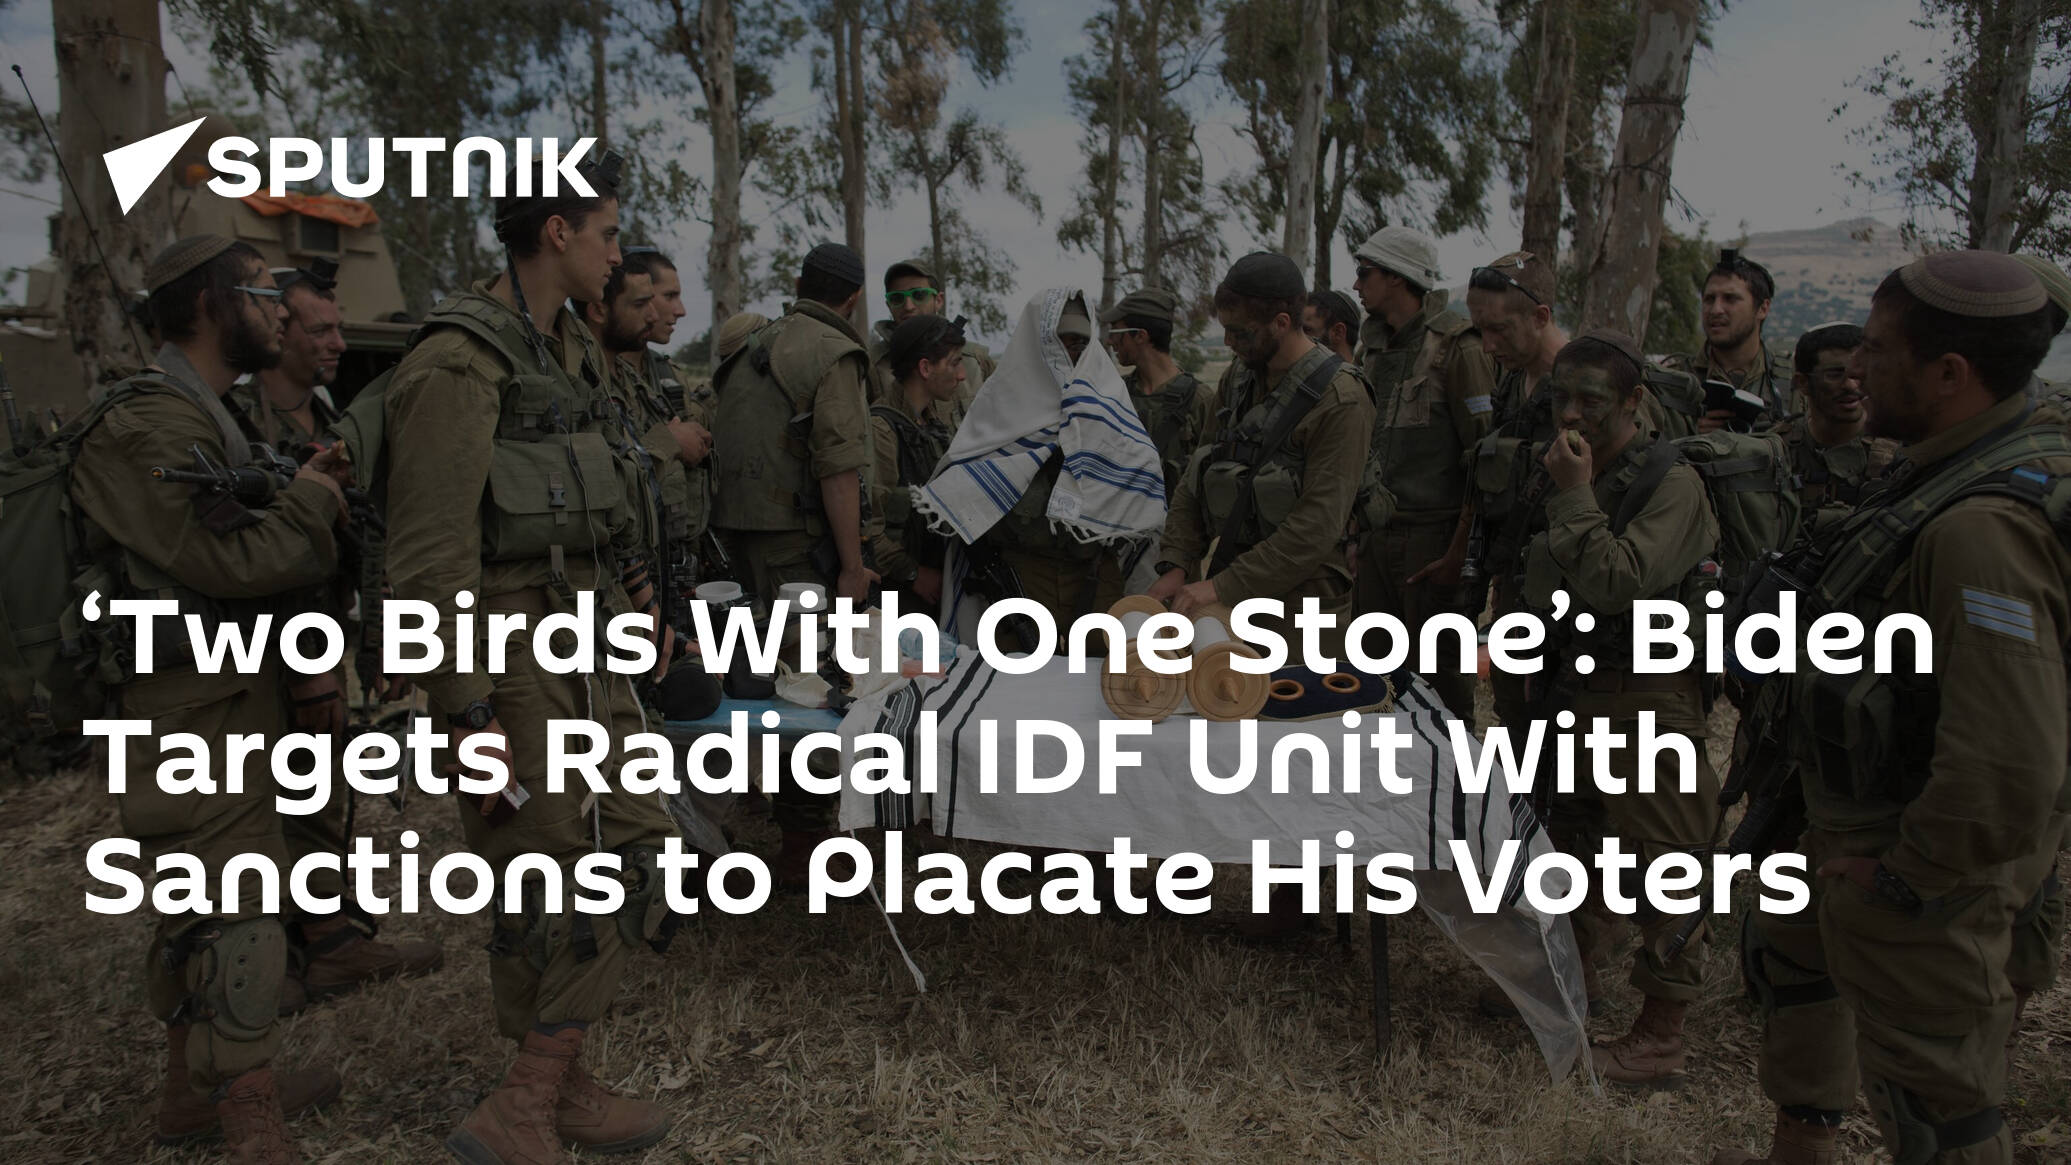 ‘Two Birds With One Stone’: Biden Targets Radical IDF Unit With Sanctions to Placate His Voters